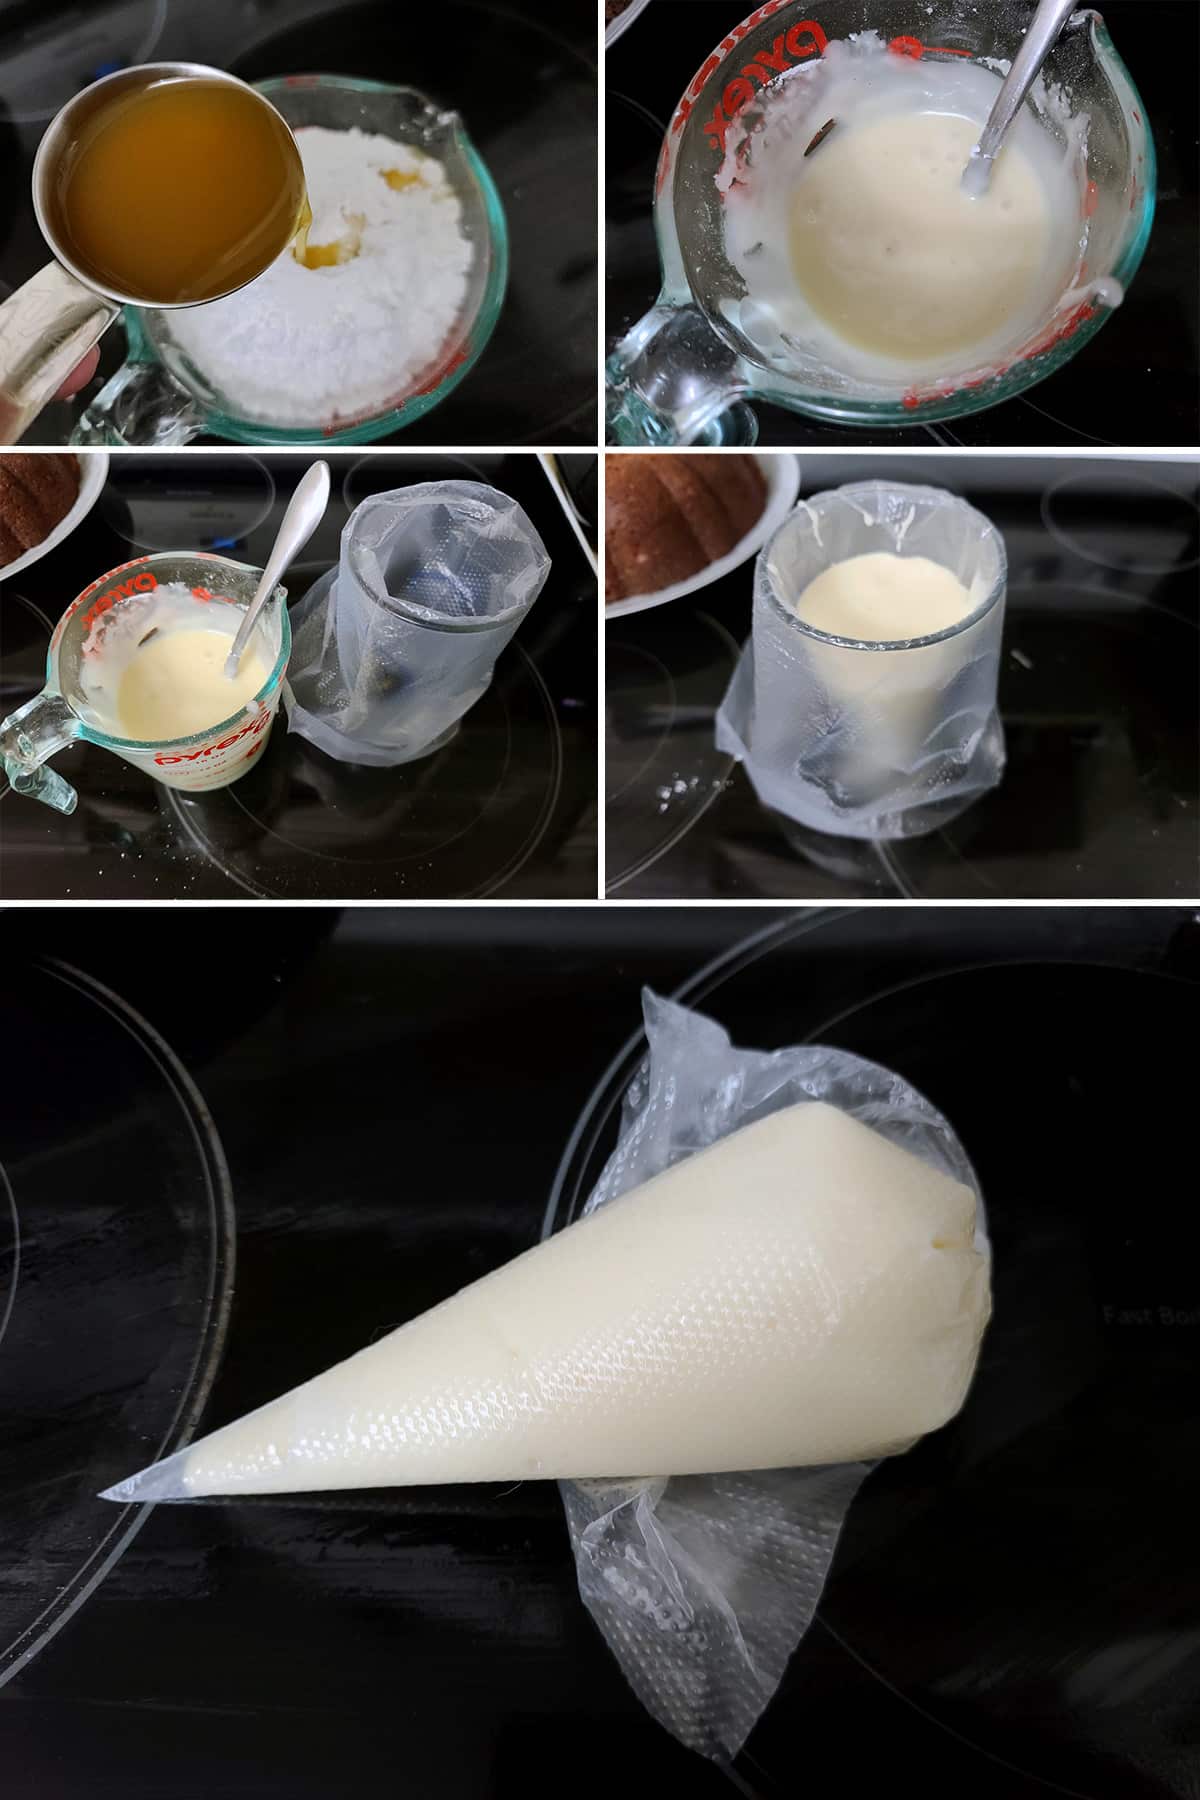 A 5 part image showing the apple cider icing being mixed and put into a pastry bag.